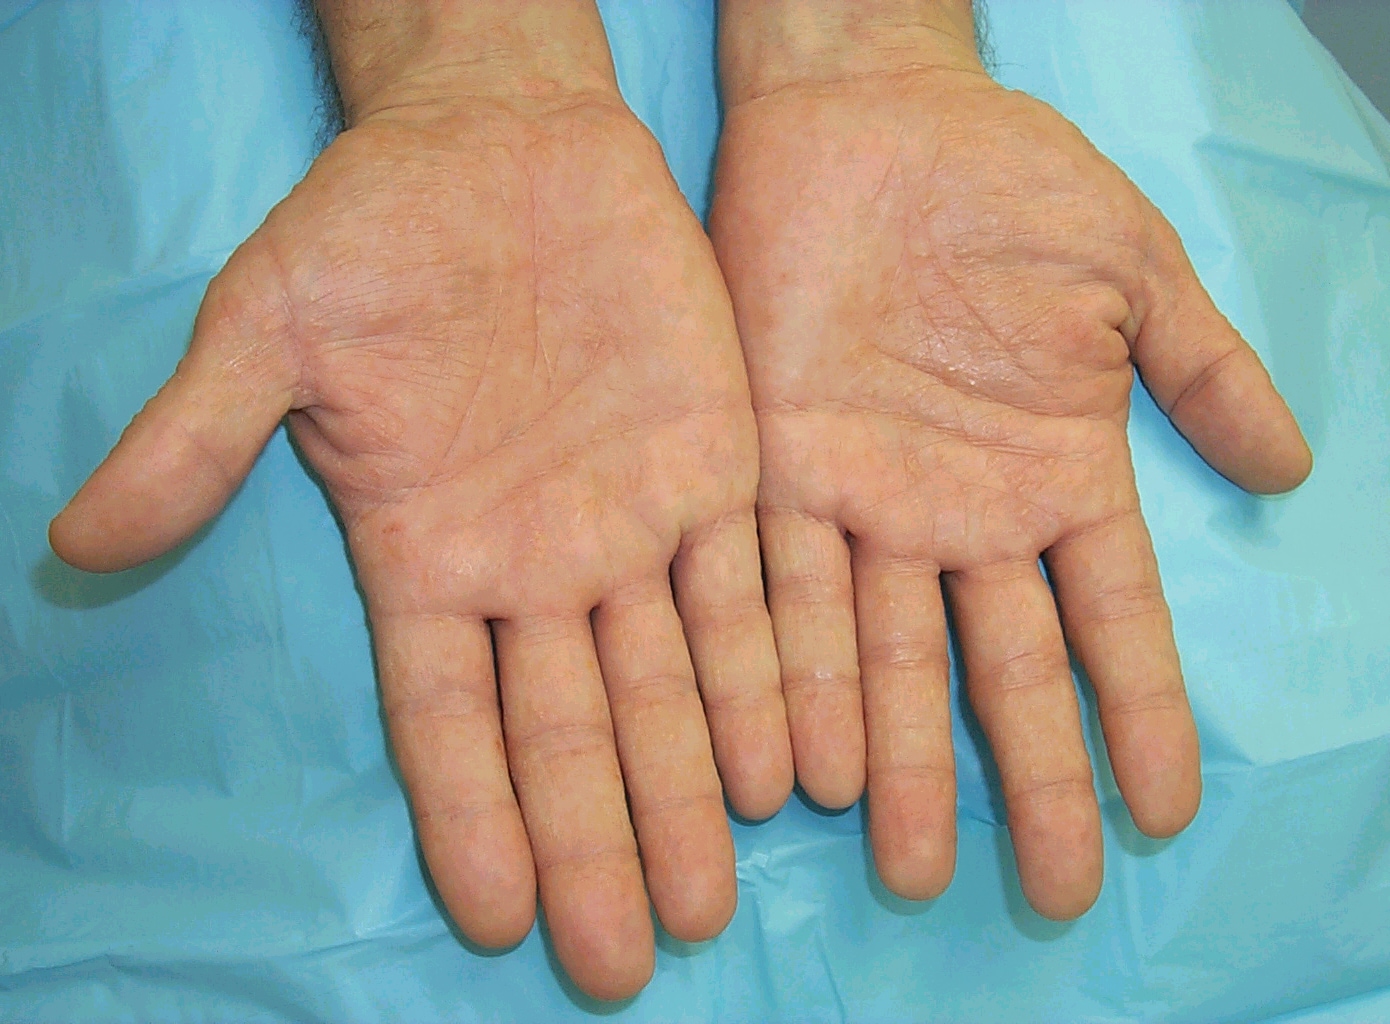 Dry Cracking Skin on the Hands & Fingers | LIVESTRONG.COM